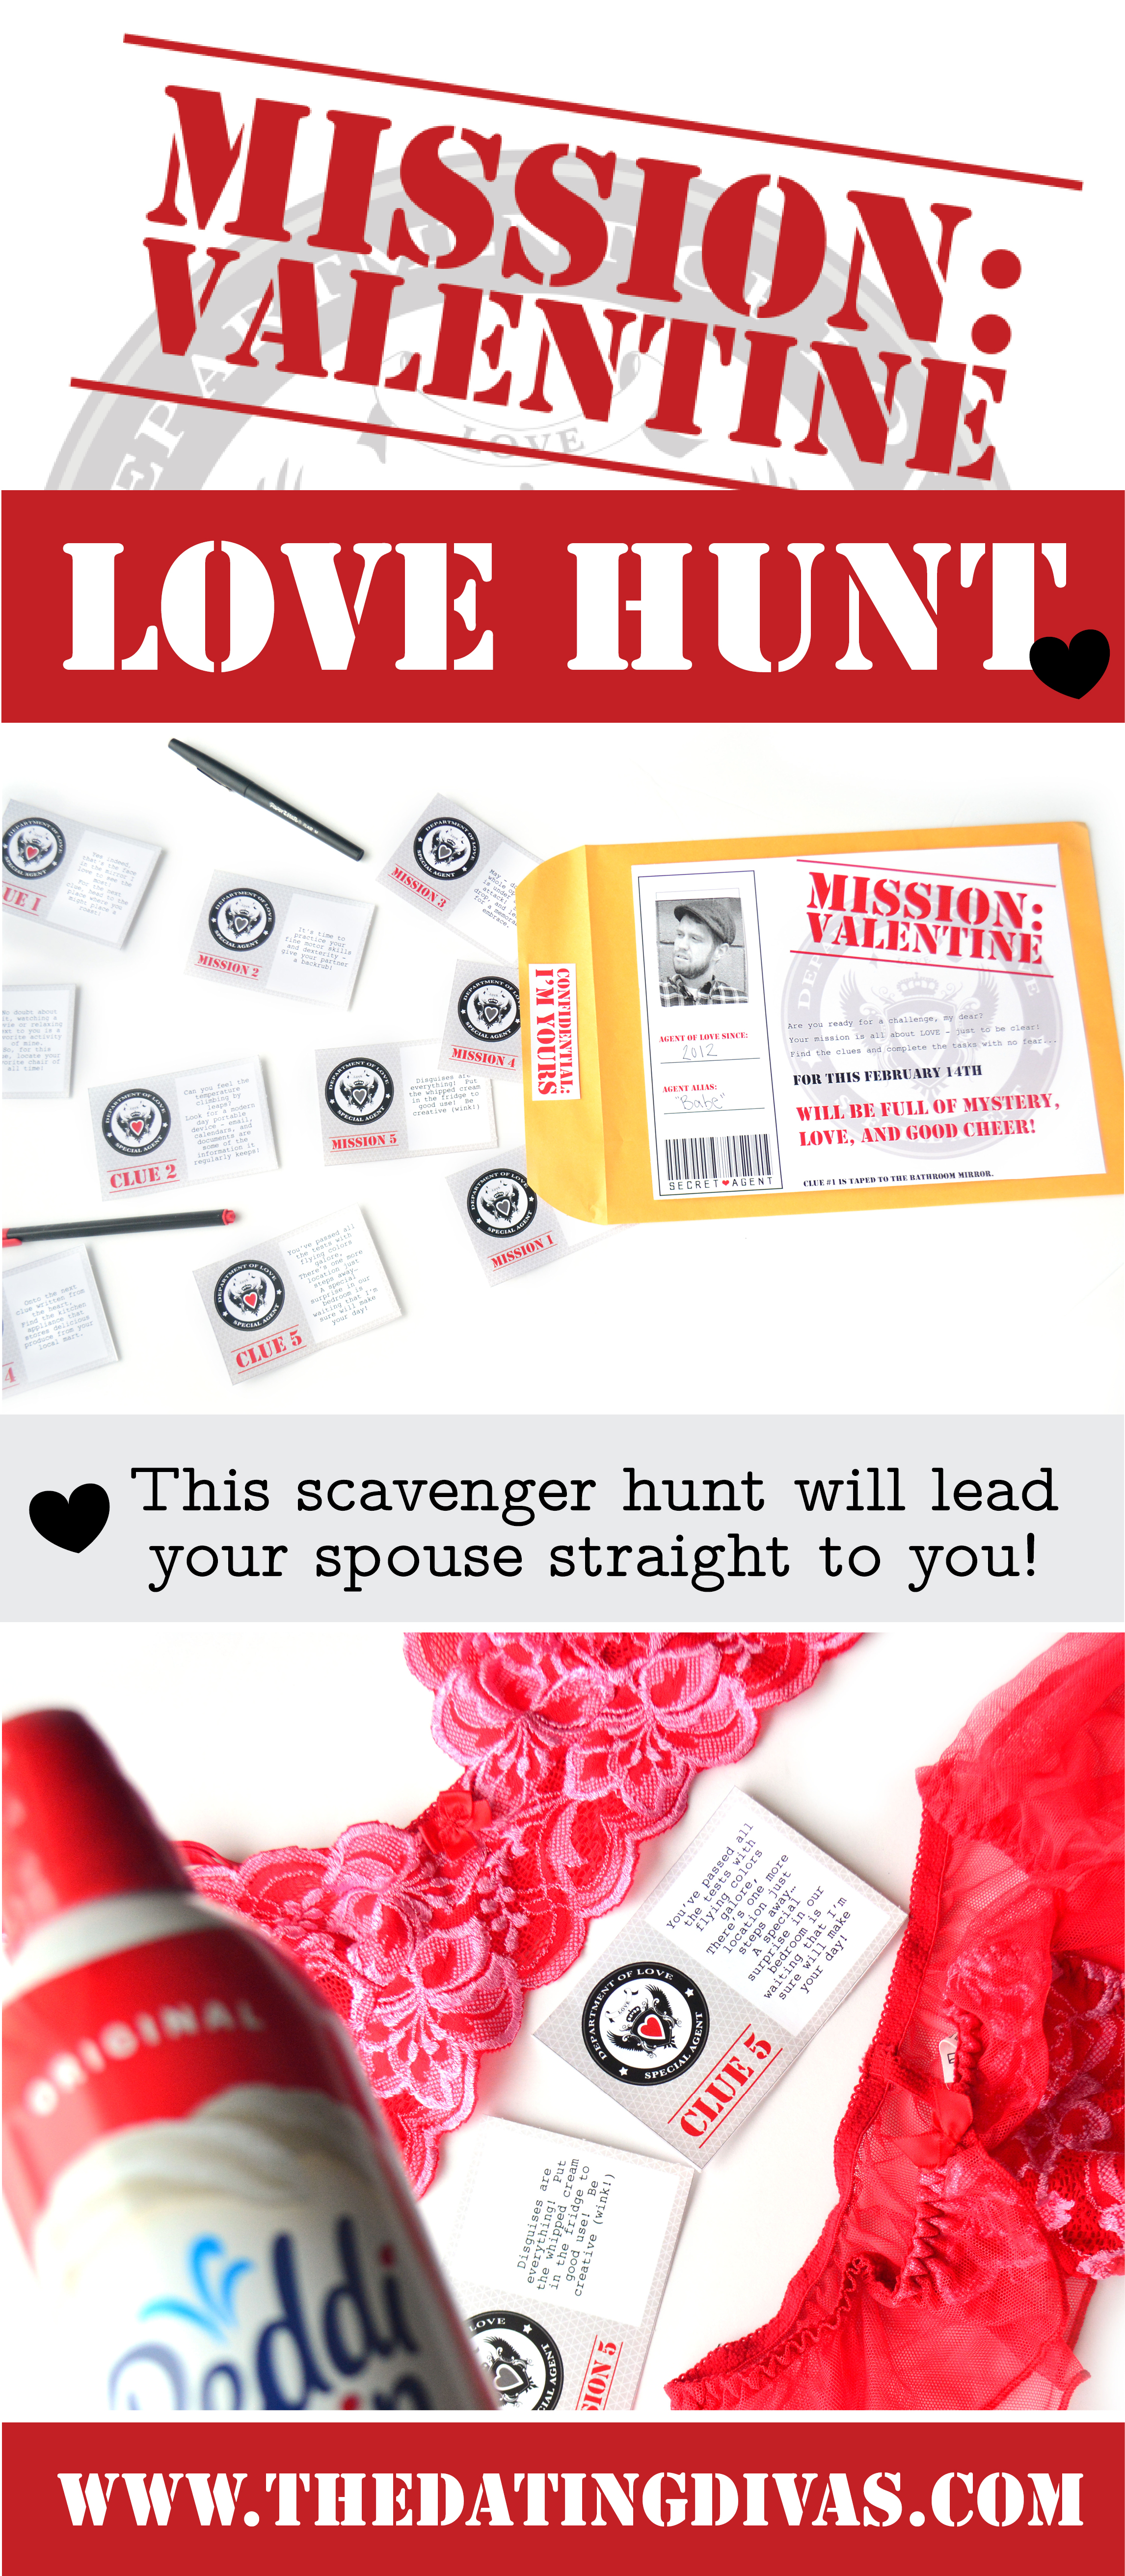 Mission: Valentine Scavenger Hunt, a romantic scavenger hunt for adults! My husband loves a good spy theme - can't wait to use this Valentine scavenger hunt! #ValentineScavengerHunt #MissionValentine